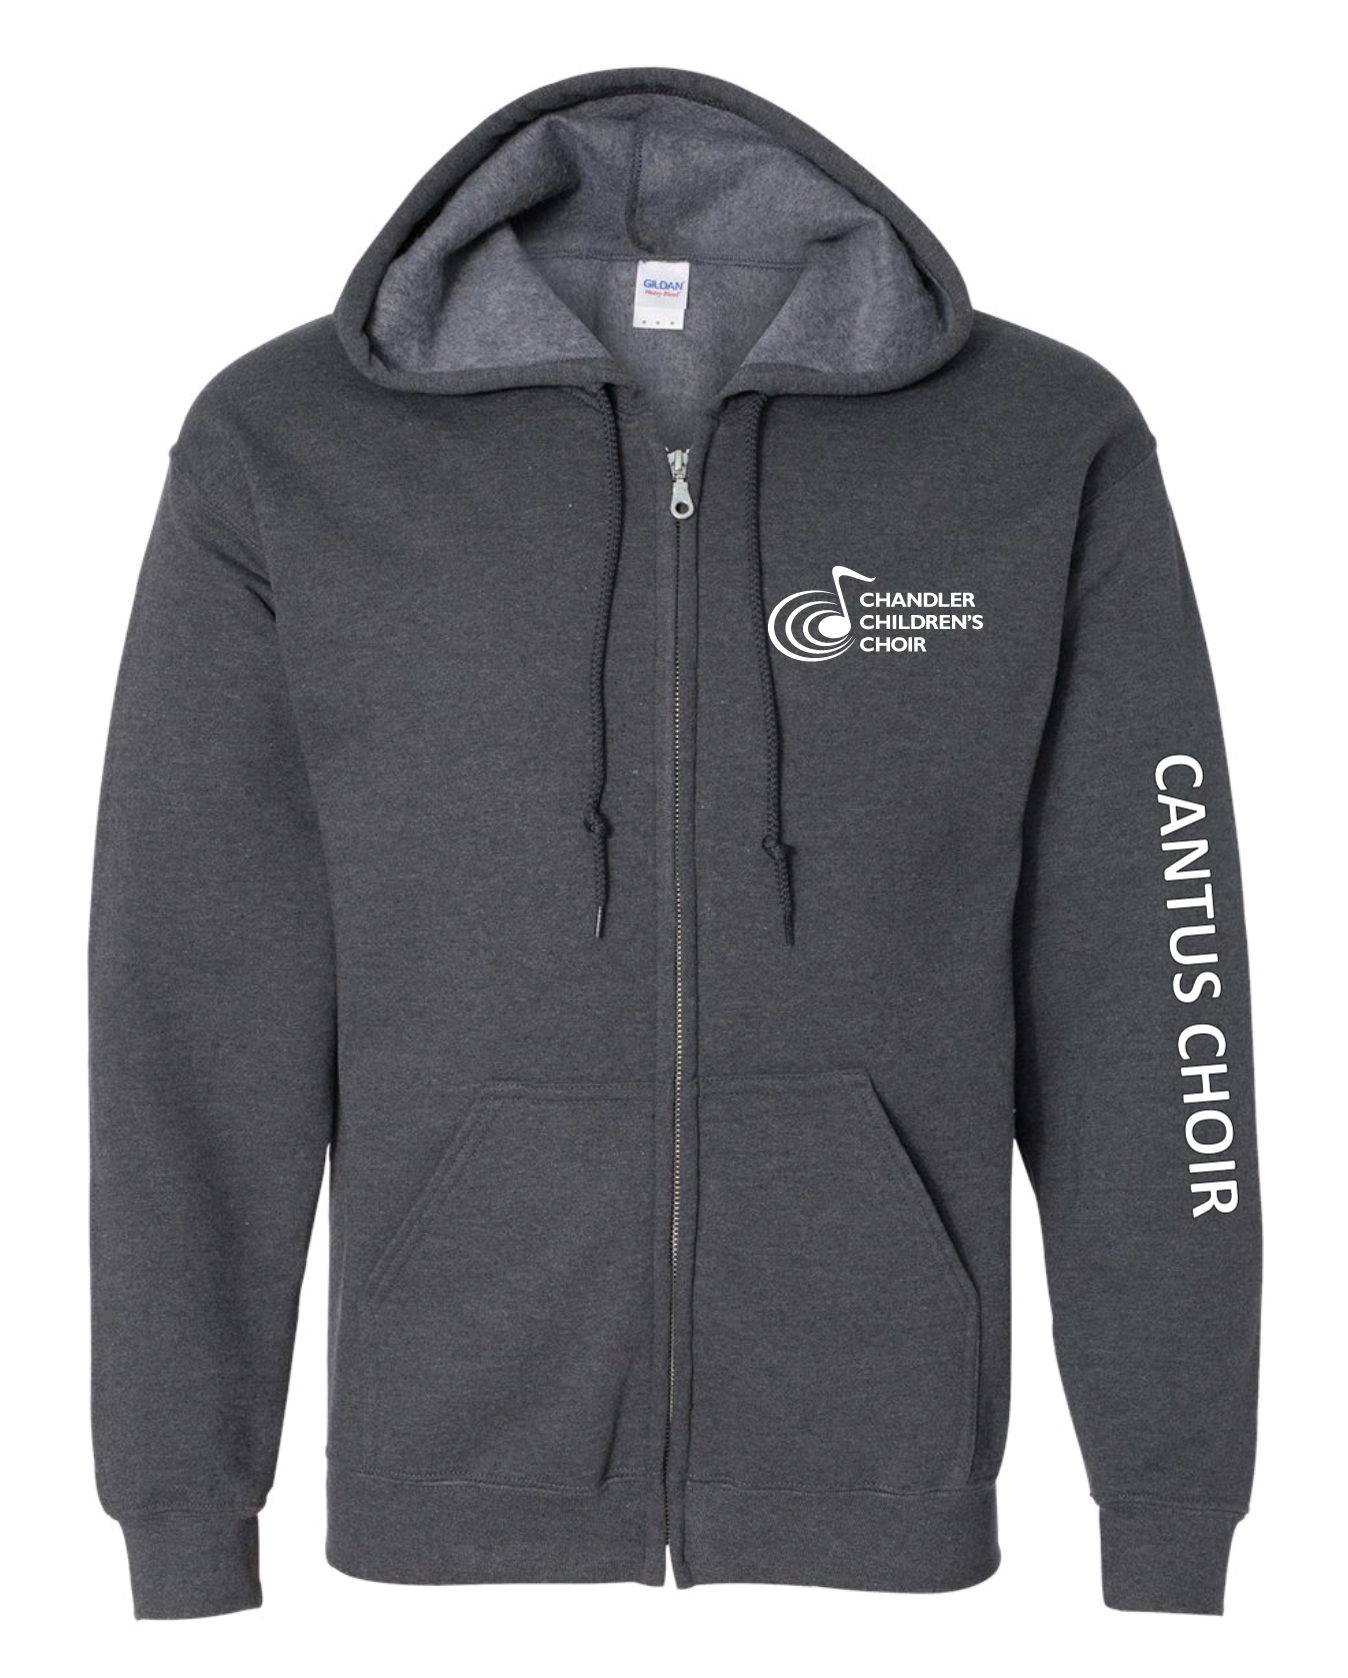 CANTUS CHOIR ONLY Youth Zip-up Hoodie